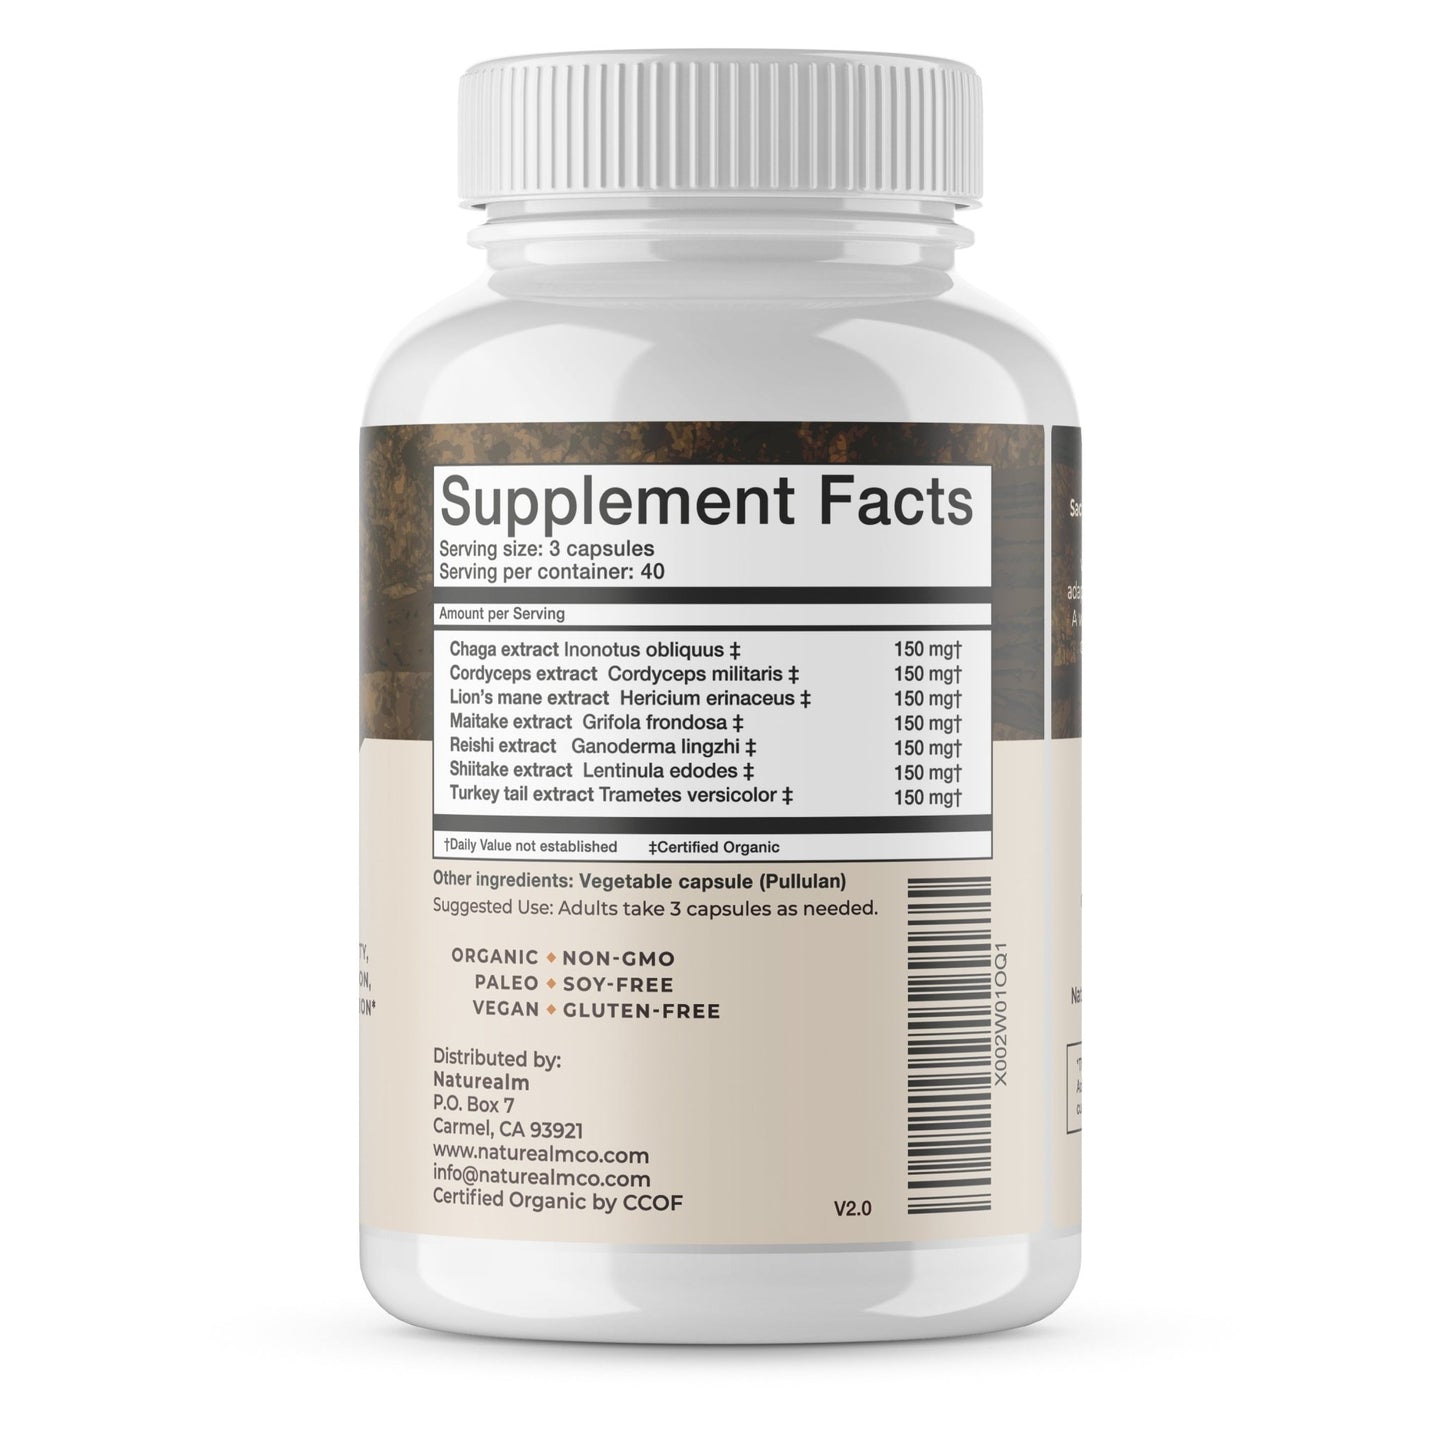 sacred 7 mushroom extract powder capsules supplement facts